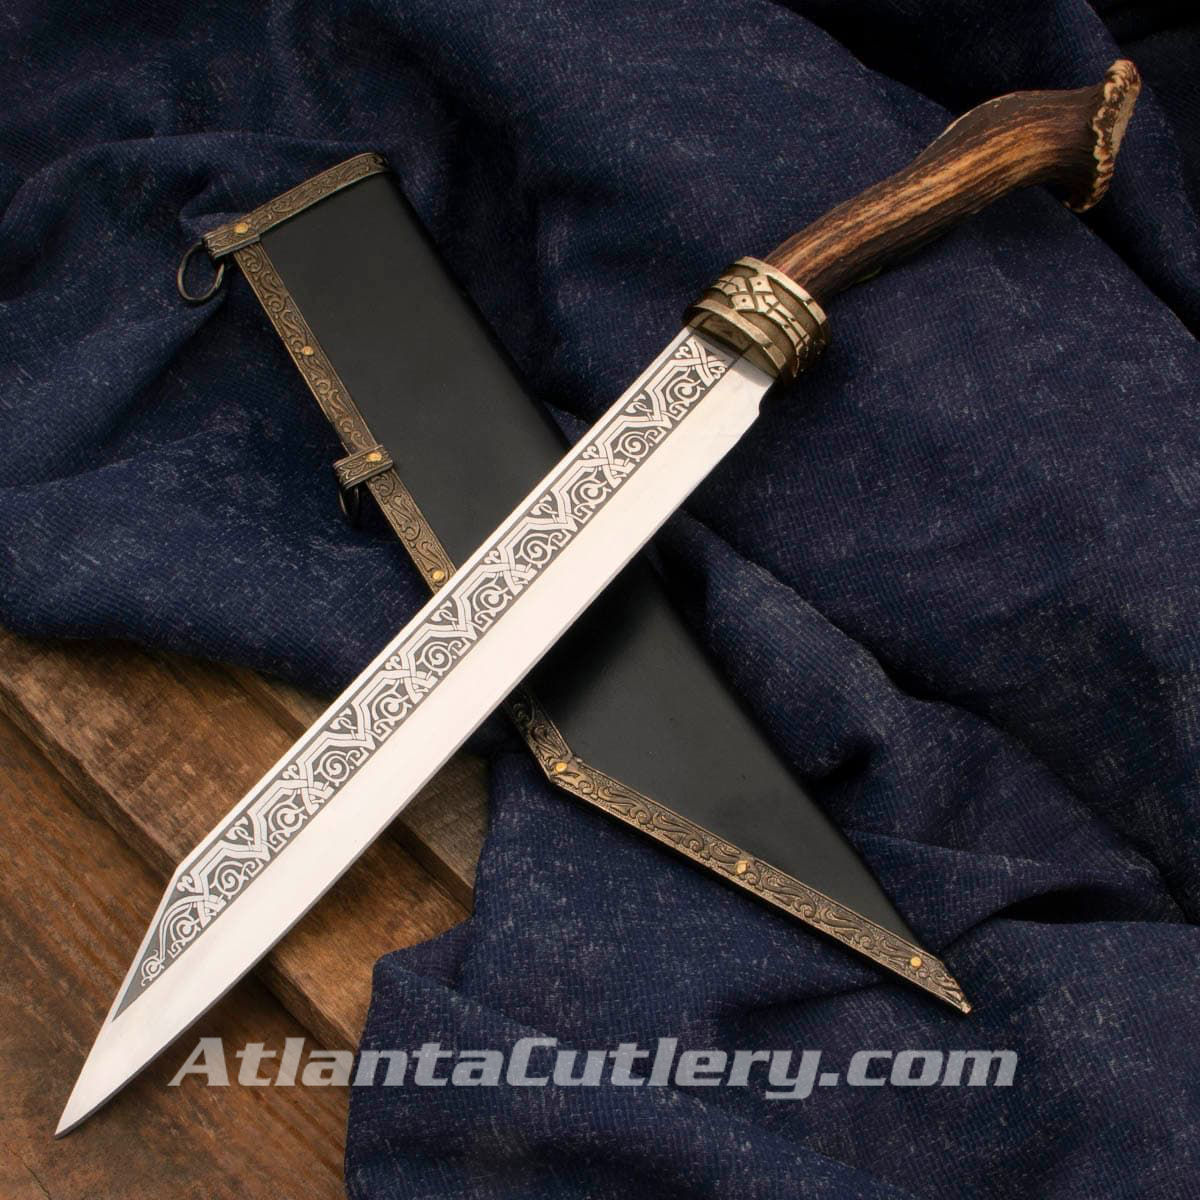 Royal Stag Seax has engraved, sharpened high carbon steel blade, brass guard with Nordic relief and Sambar Stag handle